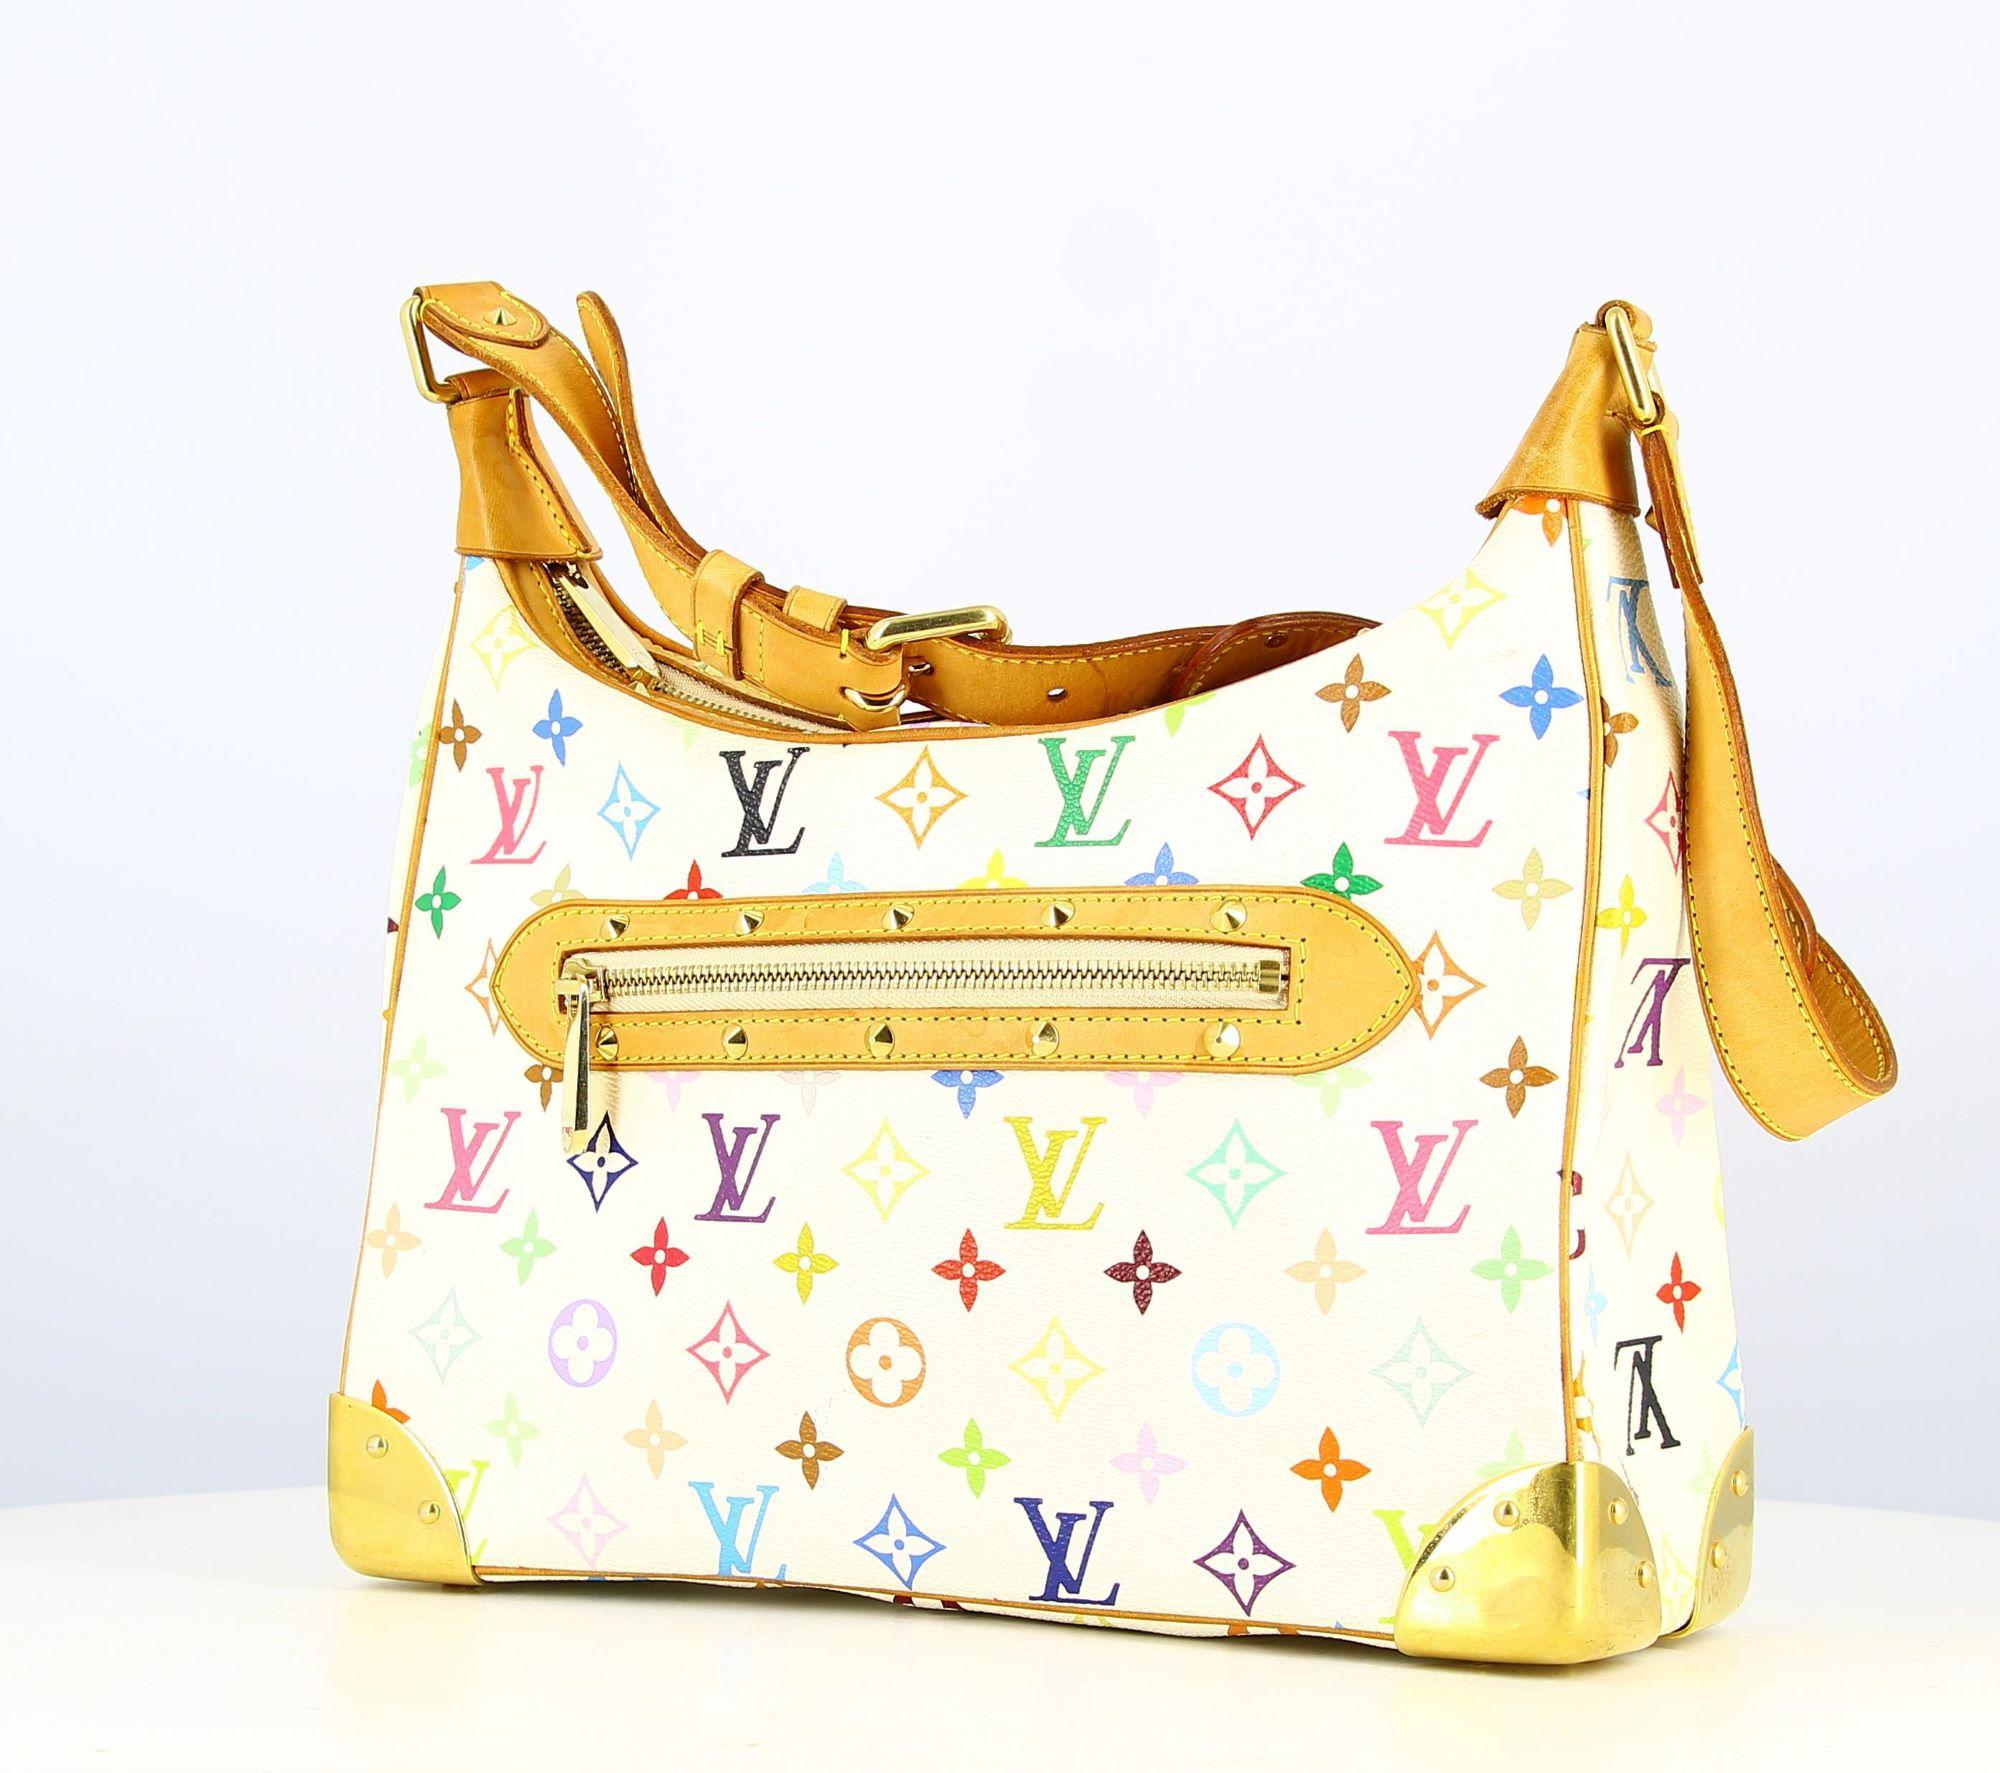 2010 Boulogne Handbag Louis Vuitton Multicolor
- Good condition, shows slight wear and tear over time
- Louis Vuitton Multicolor Boulogne handbag, brown leather straps, LV multicolor logo, golden plated zip fastener, small pocket on the back of the